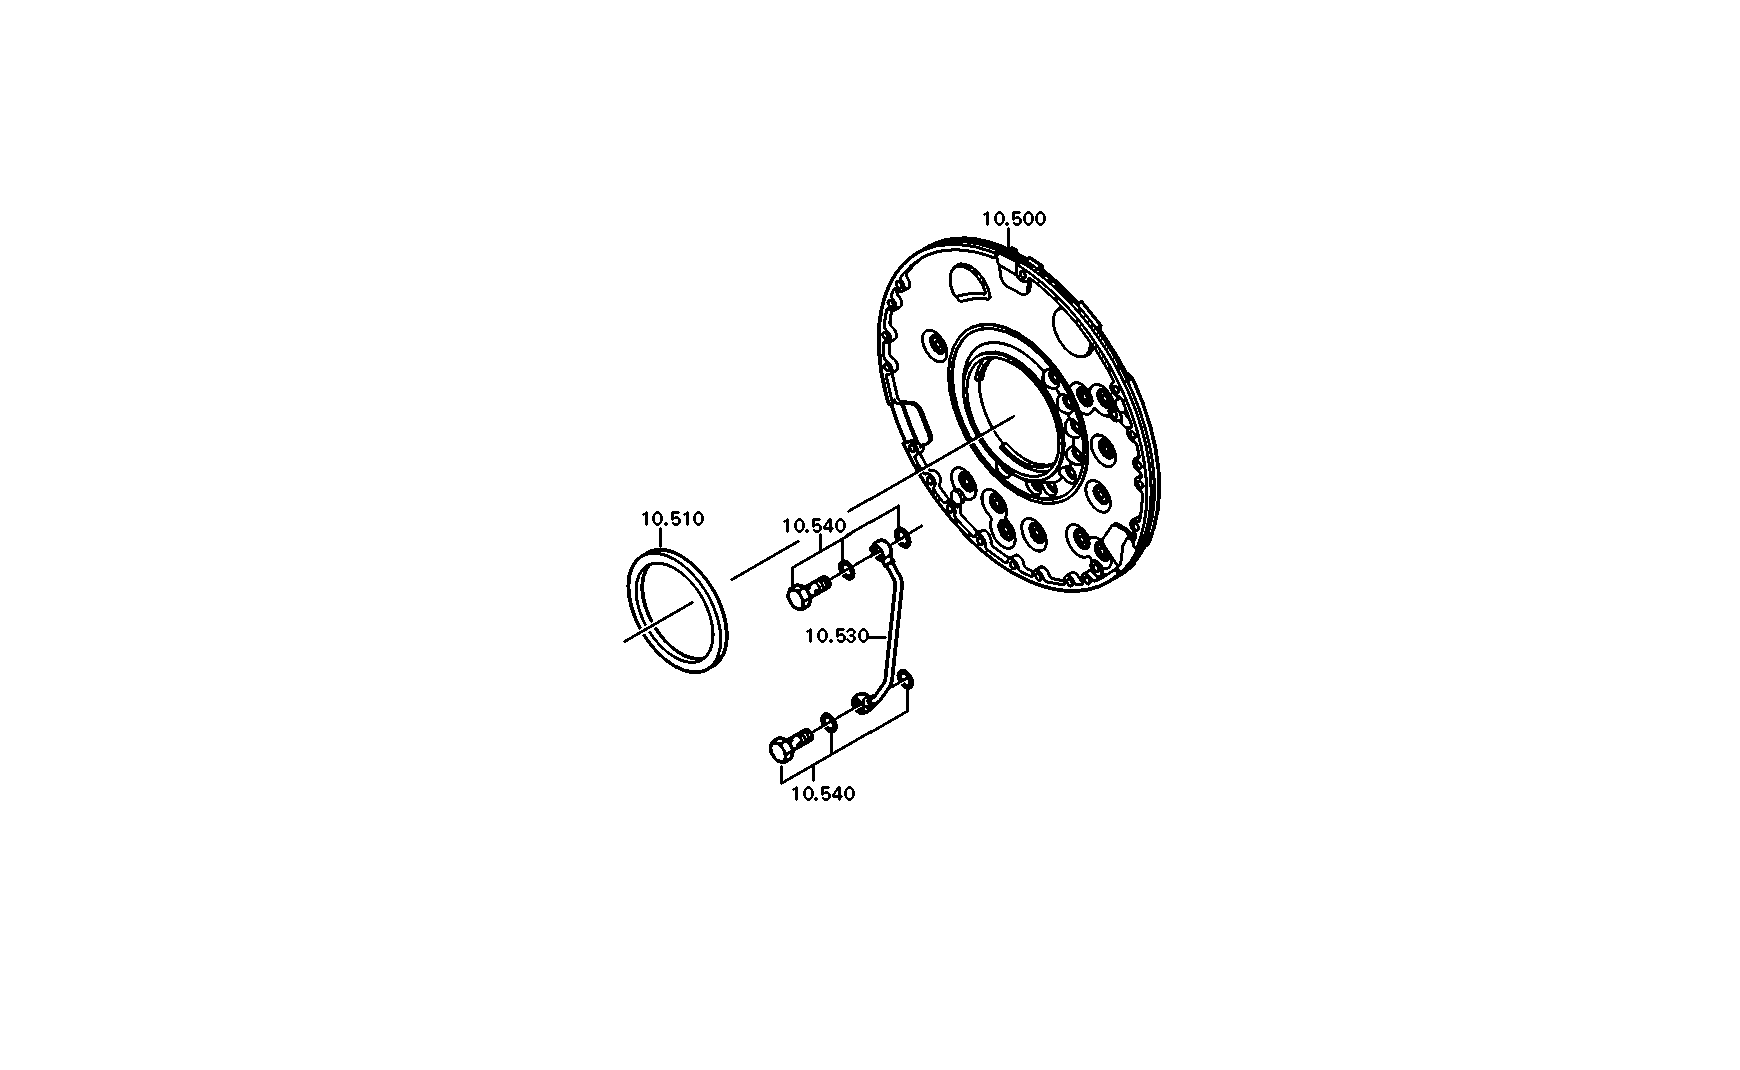 drawing for BELL-SUEDAFRIKA 7380013 - SHAFT SEAL (figure 2)